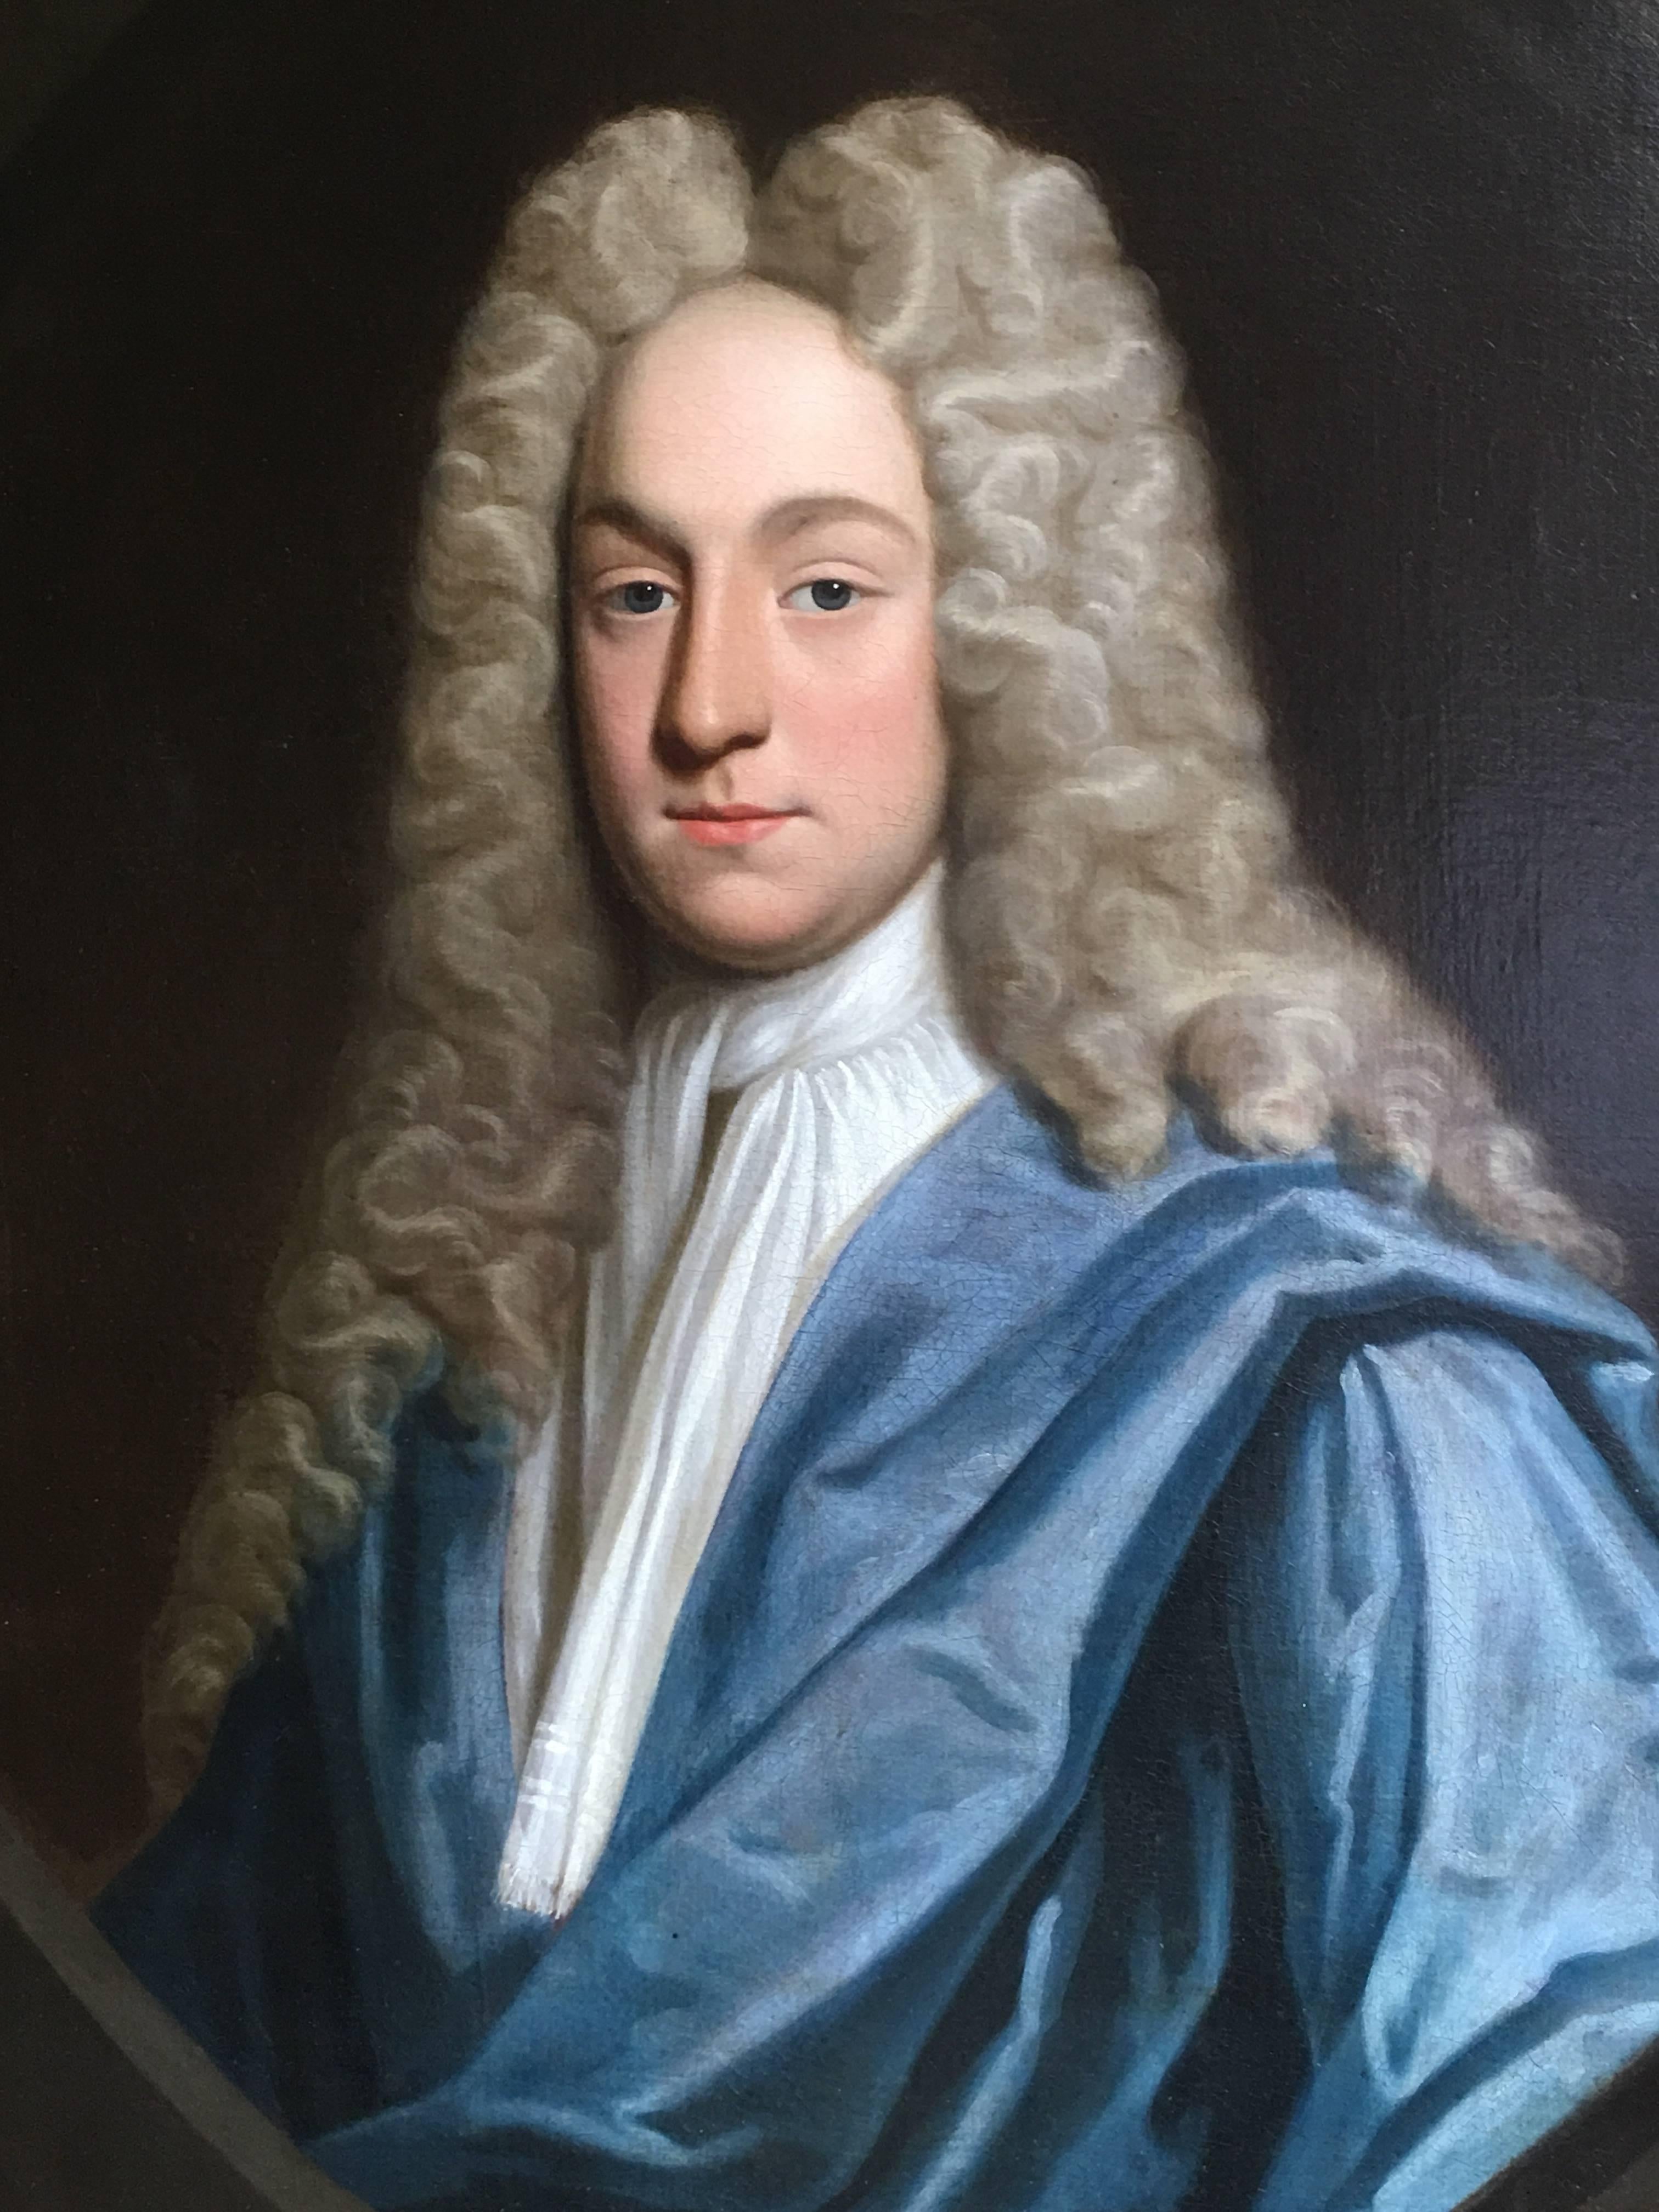 John Closterman Portrait Painting - PORTRAIT OF A GENTLEMAN IN A BLUE ROBE - ATTRIBUTED TO JOHN CLOSTERMAN.